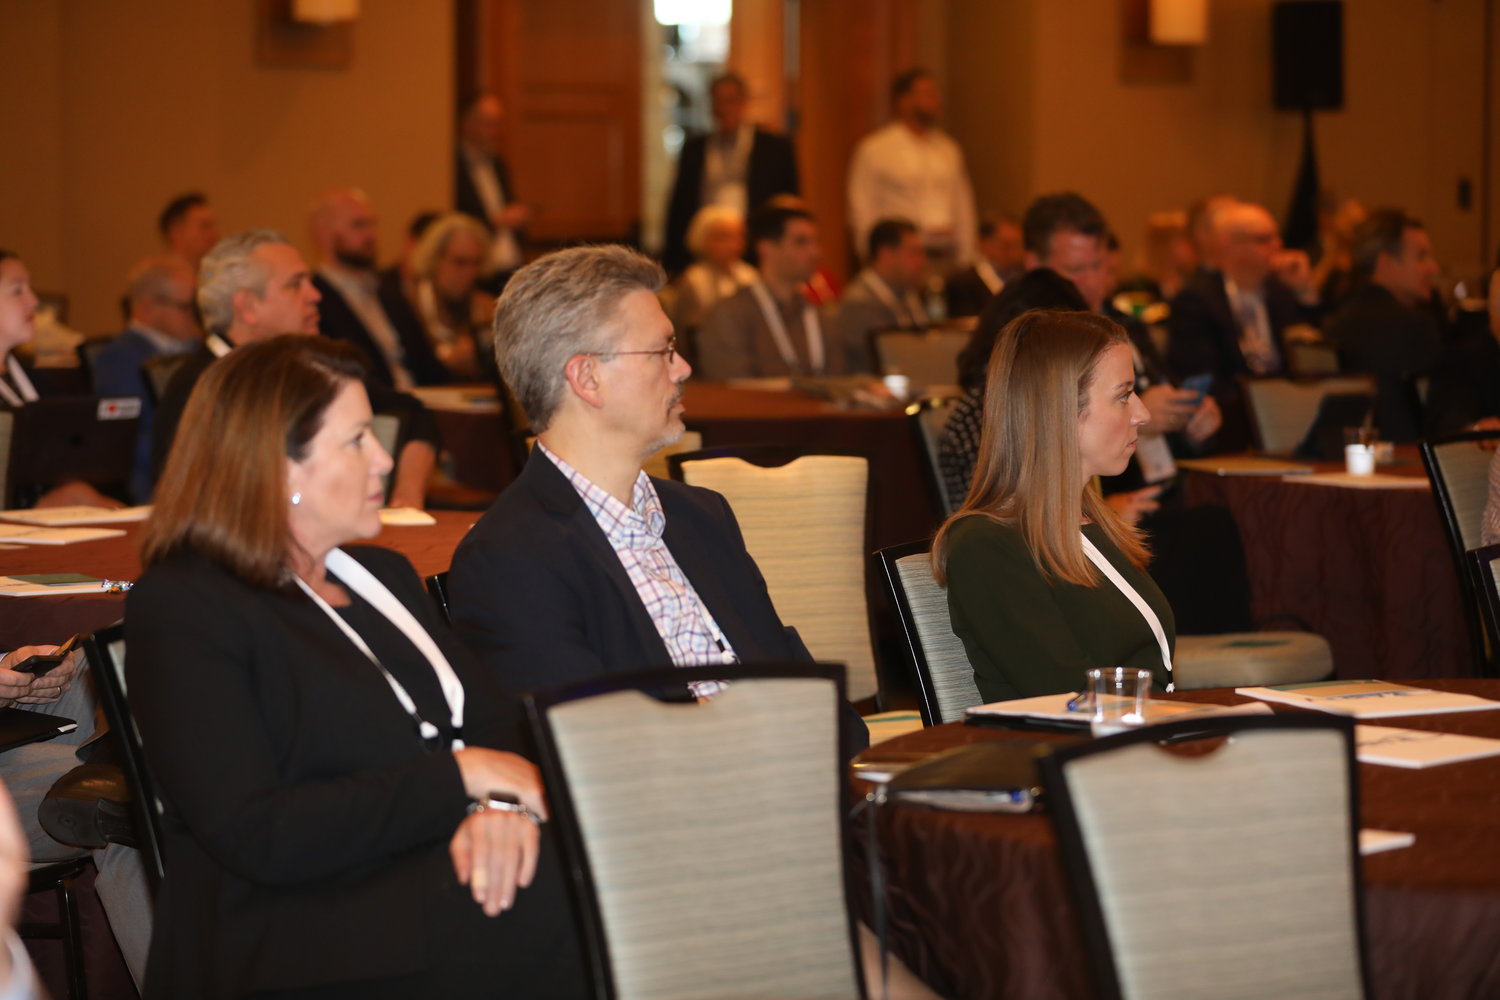 Monday photos of the Mega Conference 2020 at the Omni Hotel in Fort Worth, Texas, Feb. 17, 2020. (Bob Booth)